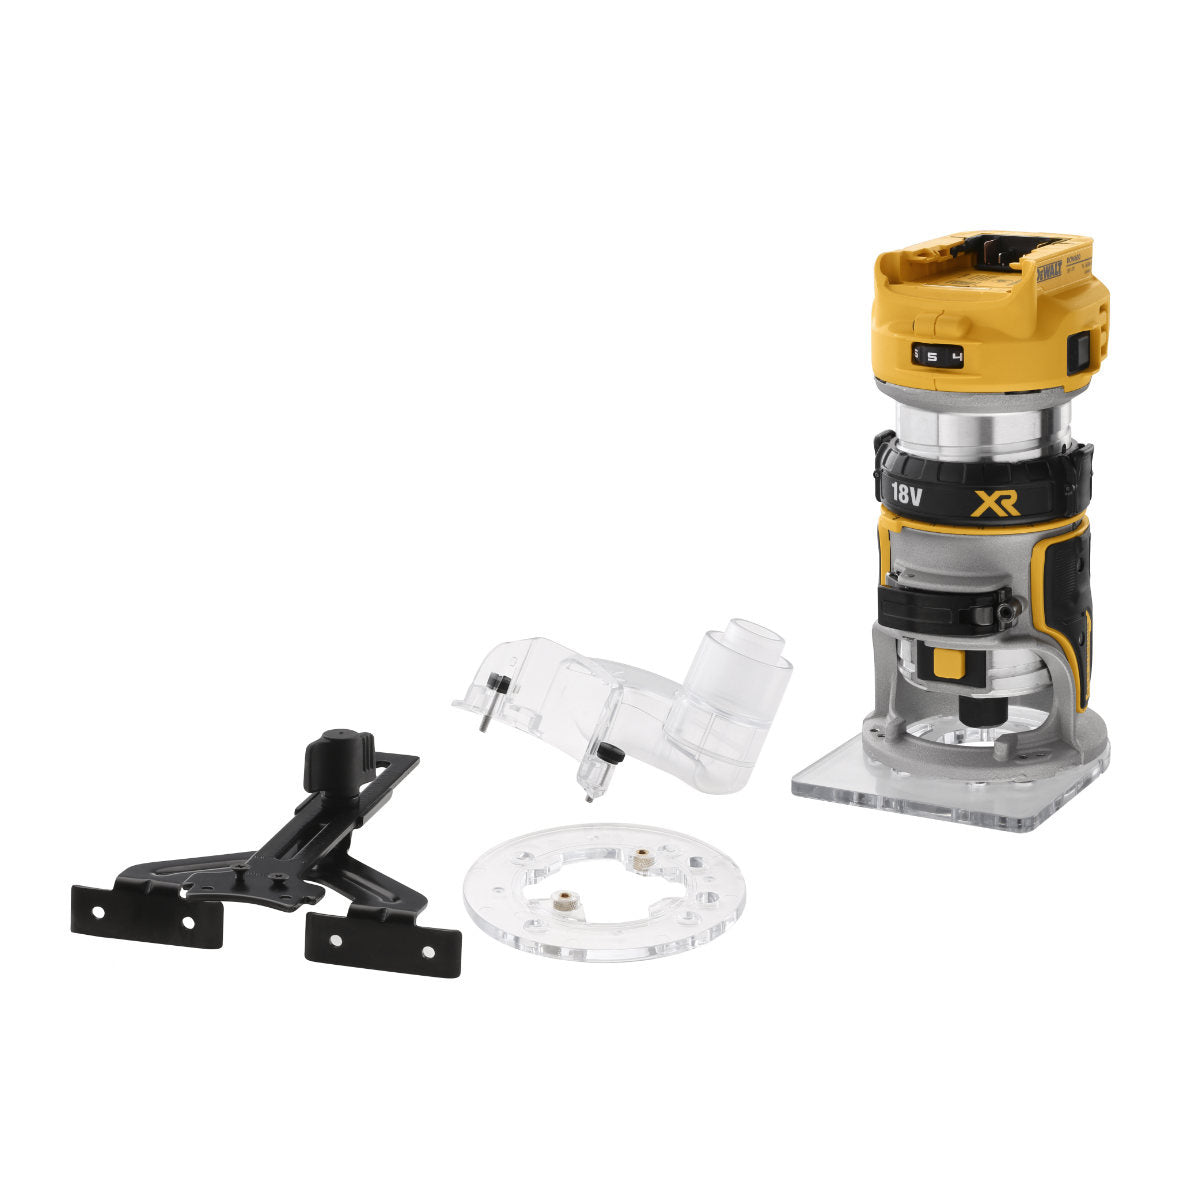 Dewalt 18V Brushless 6.35mm (1/4") Router DCW600N Power Tool Services